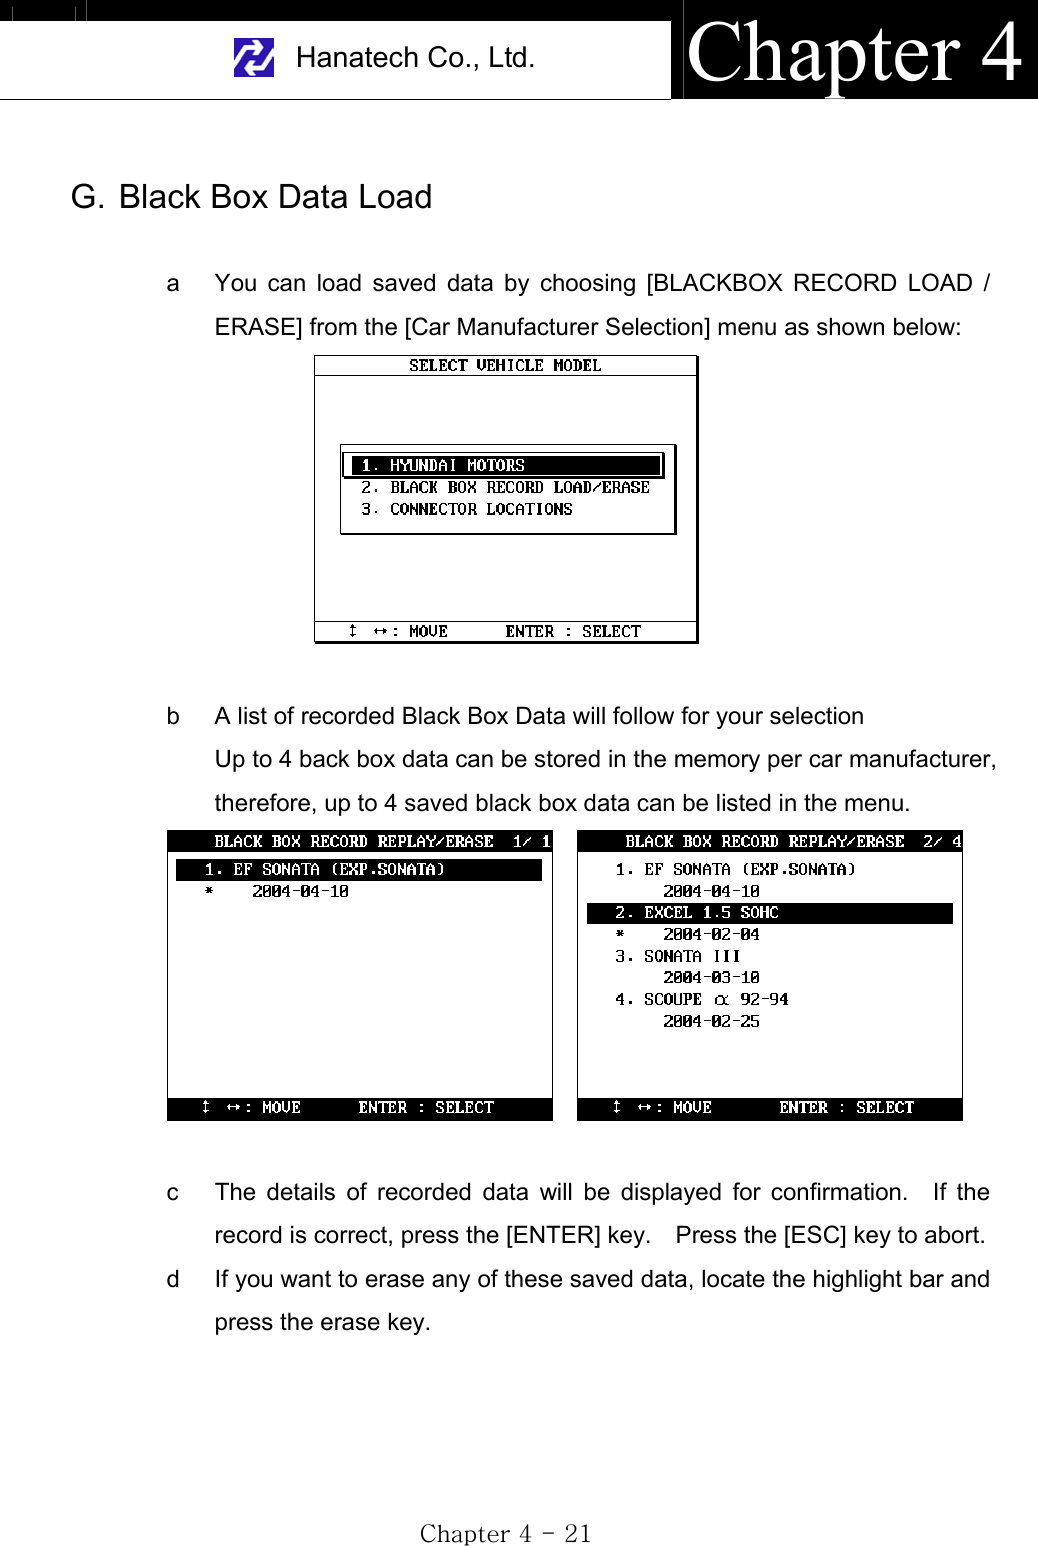 Hanatech Co., Ltd.  Chapter 4GjG[GTGYXGG. Black Box Data Load a  You can load saved data by choosing [BLACKBOX RECORD LOAD / ERASE] from the [Car Manufacturer Selection] menu as shown below: b  A list of recorded Black Box Data will follow for your selection Up to 4 back box data can be stored in the memory per car manufacturer, therefore, up to 4 saved black box data can be listed in the menu. c  The details of recorded data will be displayed for confirmation.  If the record is correct, press the [ENTER] key.    Press the [ESC] key to abort. d  If you want to erase any of these saved data, locate the highlight bar and press the erase key. 